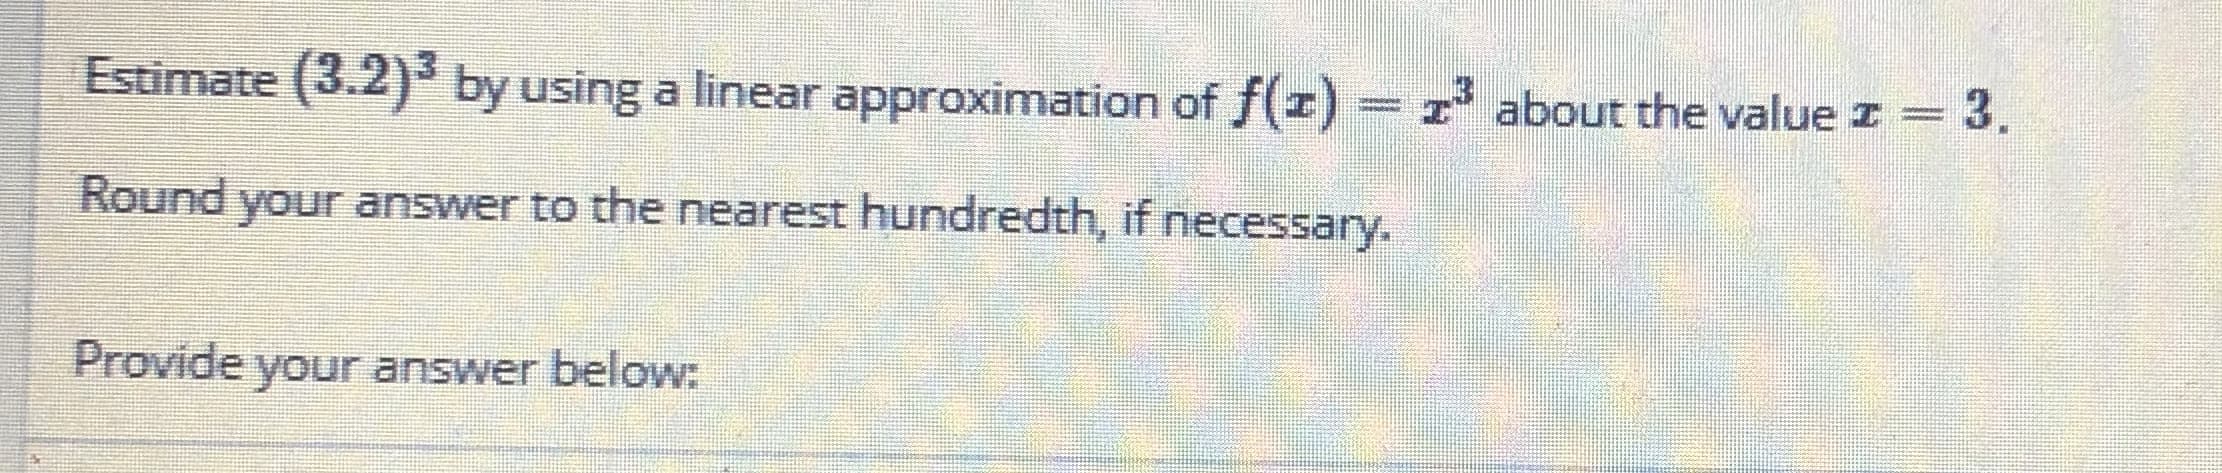 Estimate (3.2) by using a linear approximation of f(r)-
=z about the value I = 3.
Round your answer to the nearest hundredth, if necessary.
Provide your answer below:
